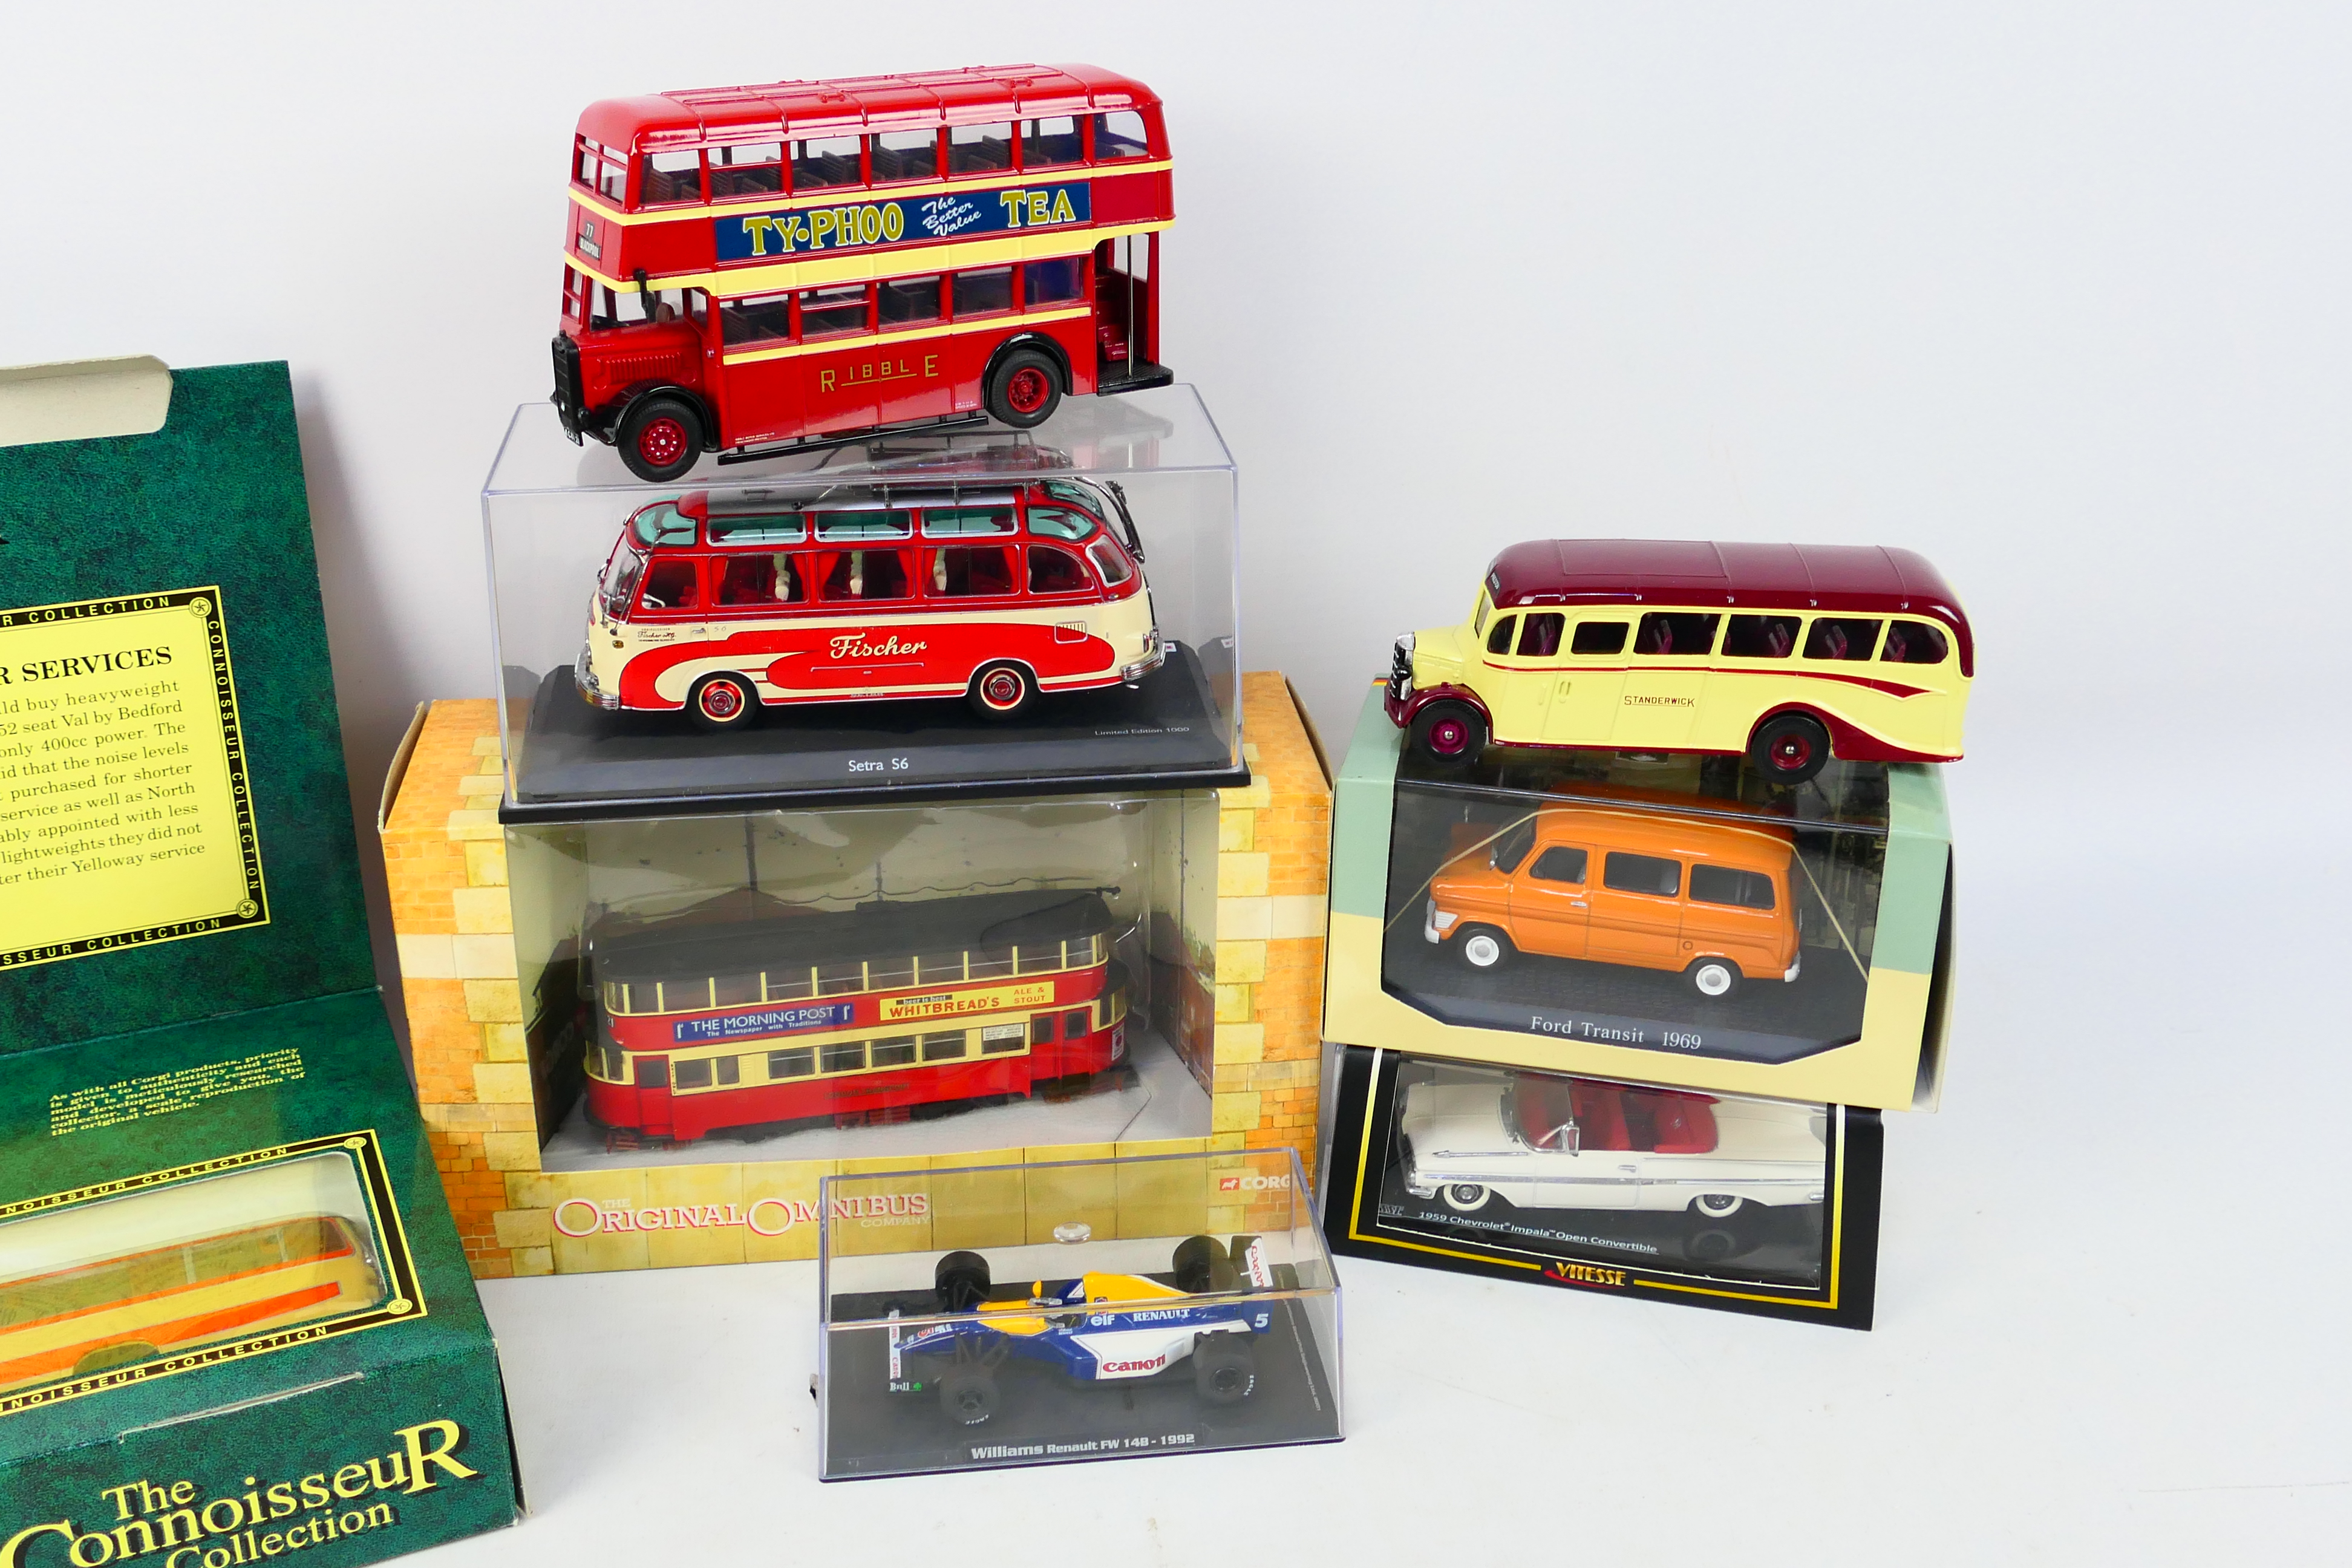 Schuco - Vitesse - Atlas - Corgi - A collection of vehicles including limited edition Setra S6 bus, - Image 2 of 3